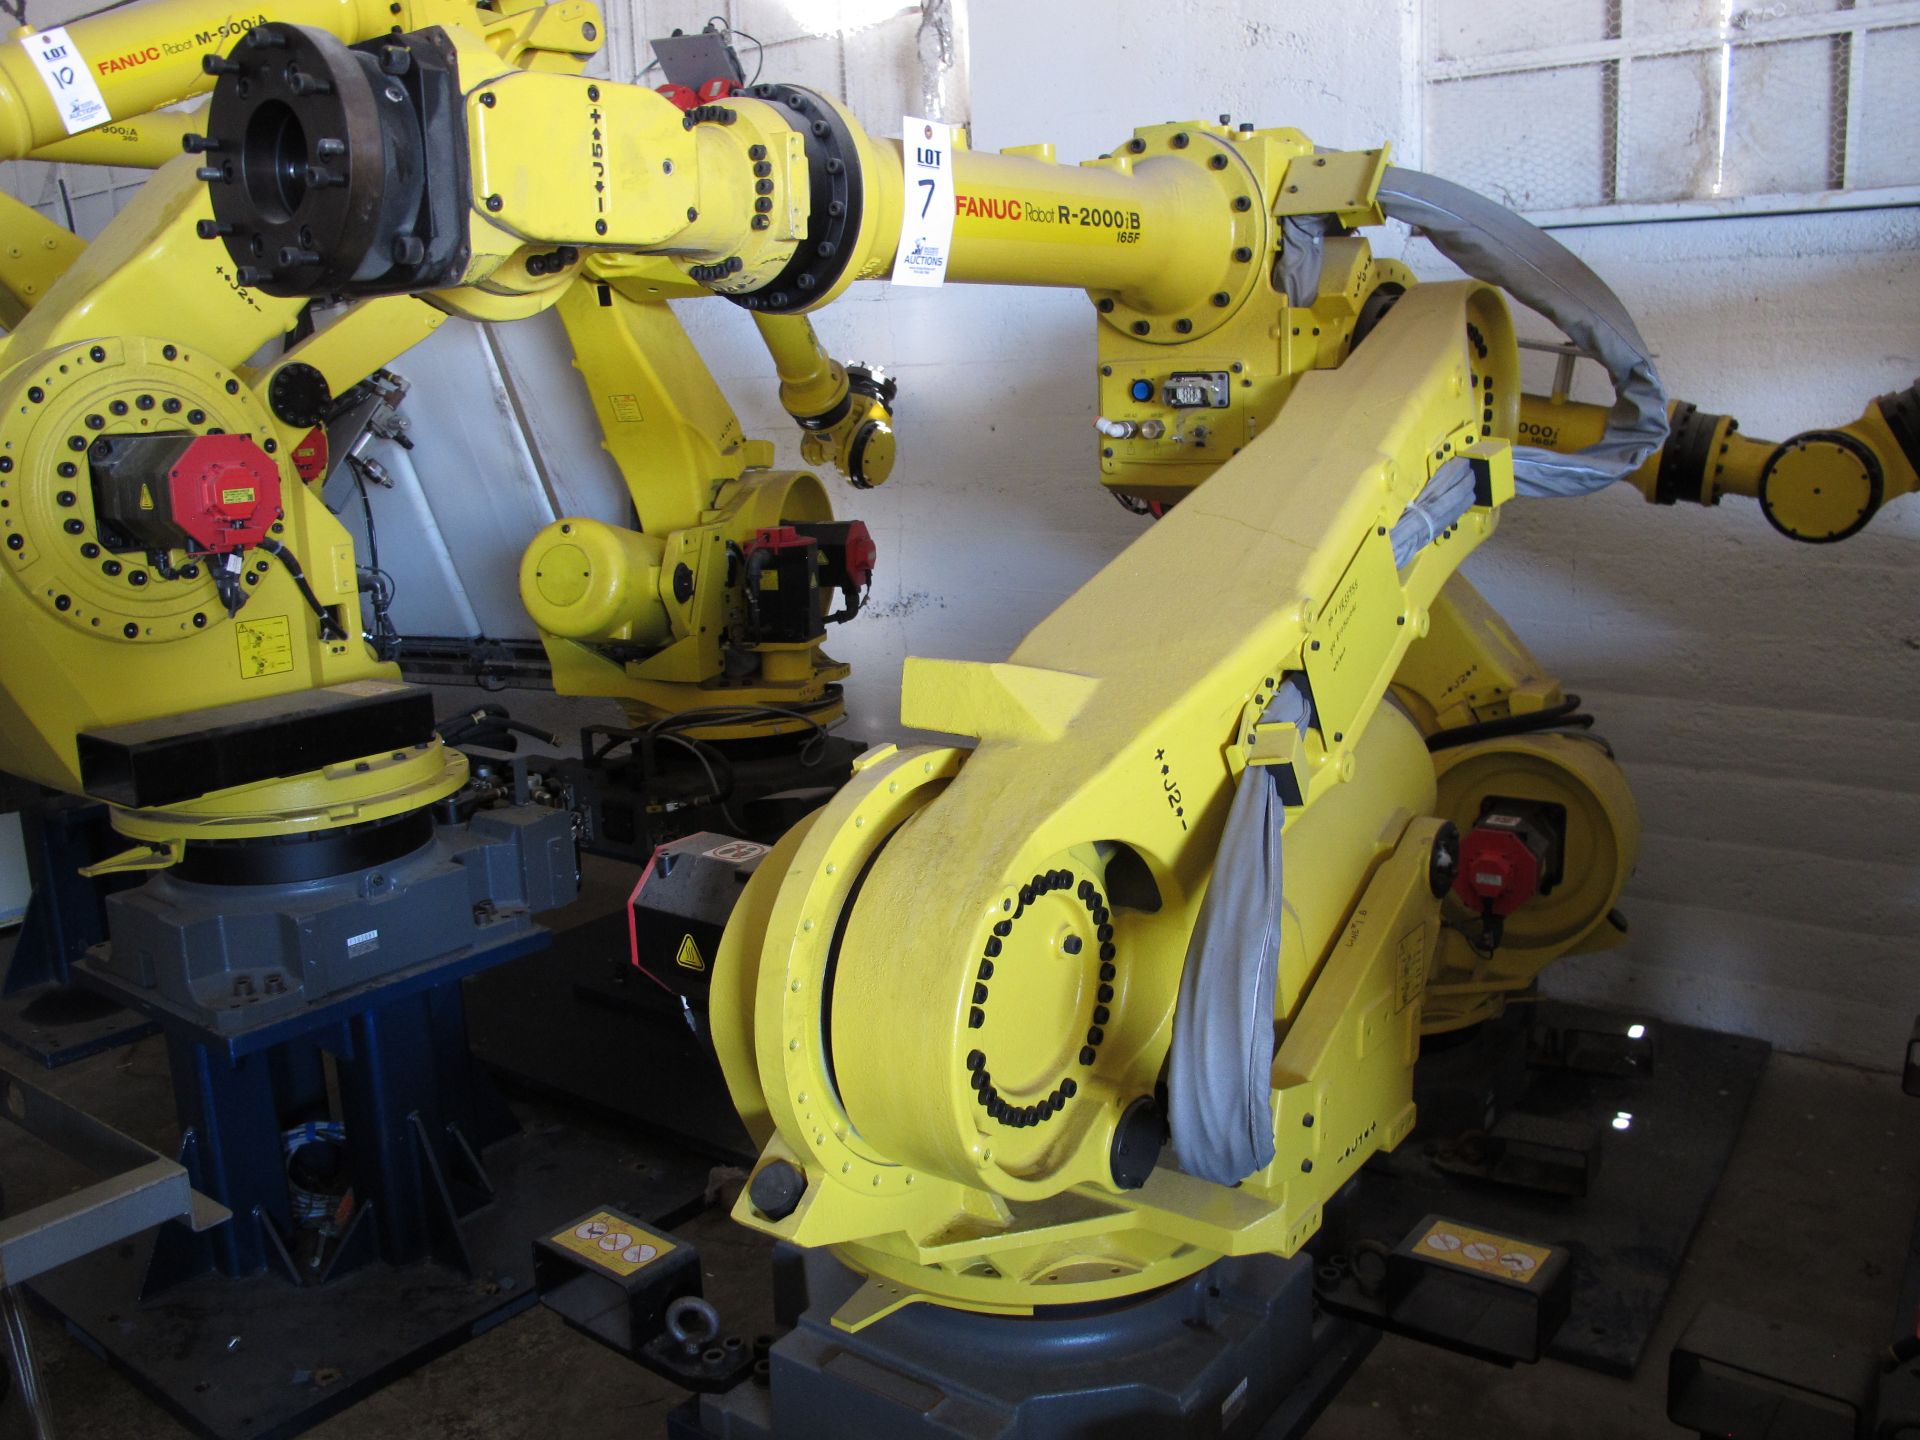 FANUC INDUSTRIAL JOINTED ARM ROBOT, MODEL R-2000iB 165F, TYPE A05B-1329-B201, MANUFACTURED MAY